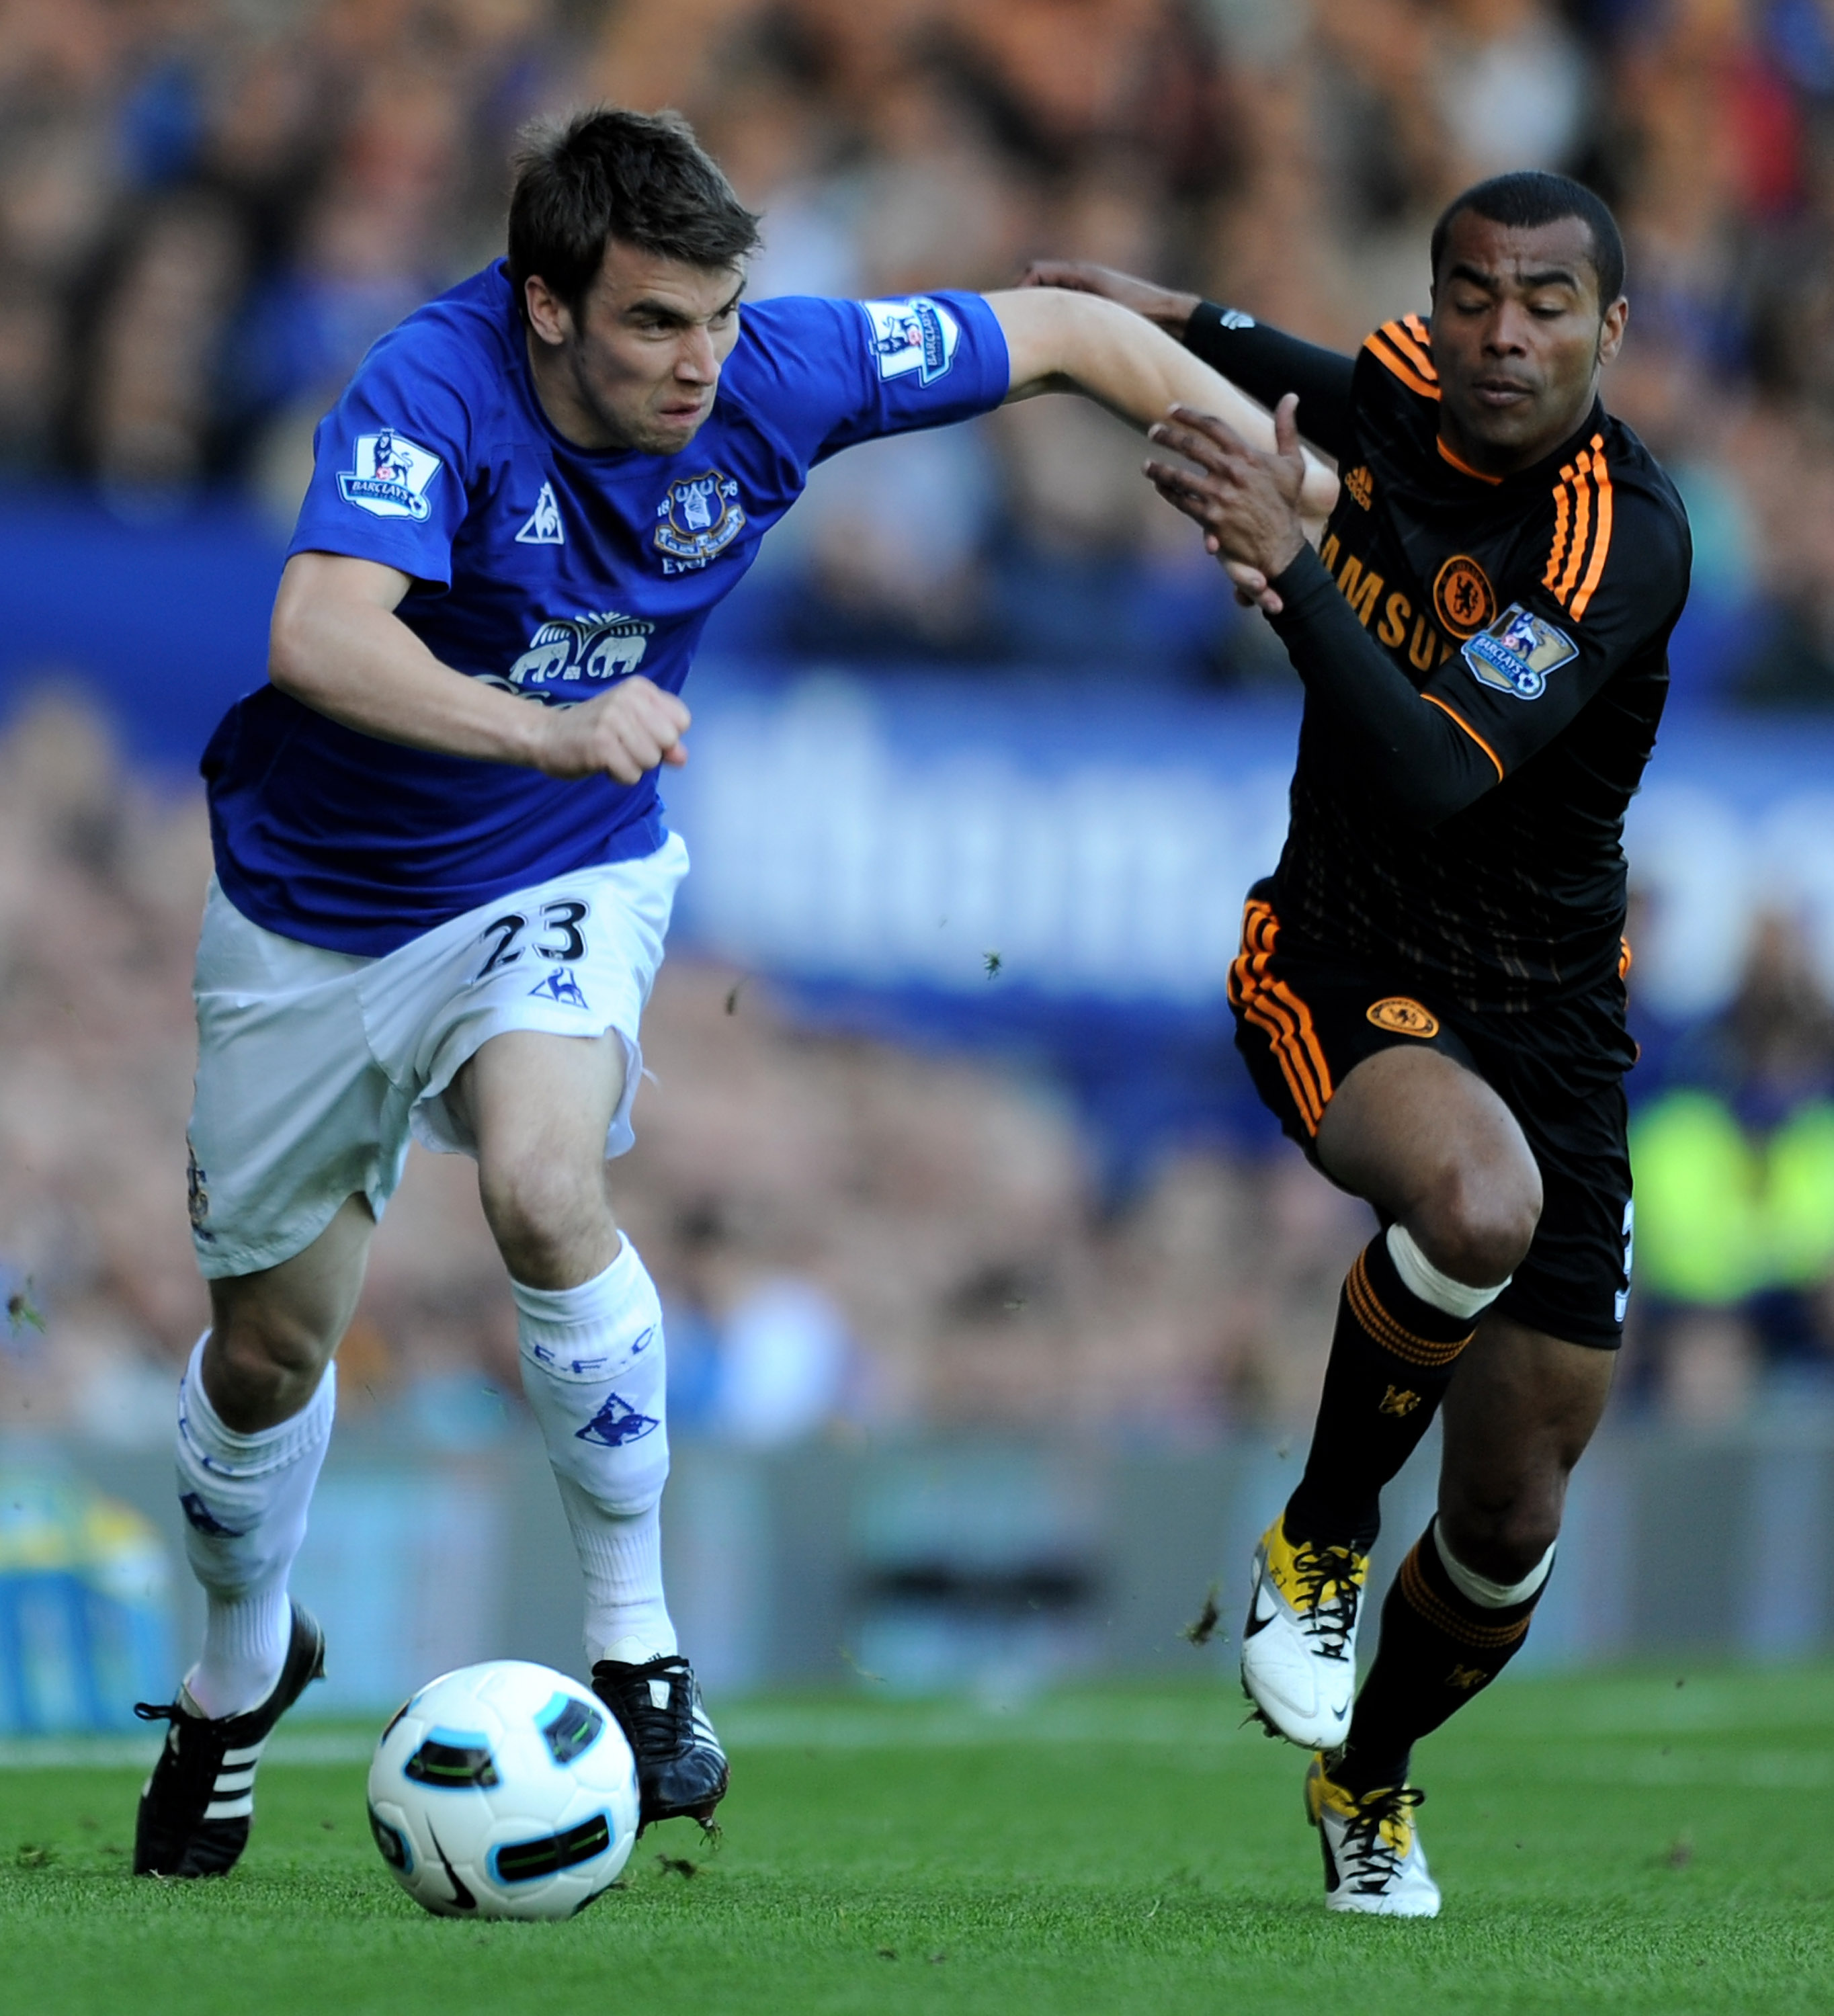 LIVERPOOL, ENGLAND - MAY 22:   Ashley Cole of Chelsea competes with Seamus Coleman of Everton during the Barclays Premier League match between Everton and Chelsea at Goodison Park on May 22, 2011 in Liverpool, England.  (Photo by Chris Brunskill/Getty Ima